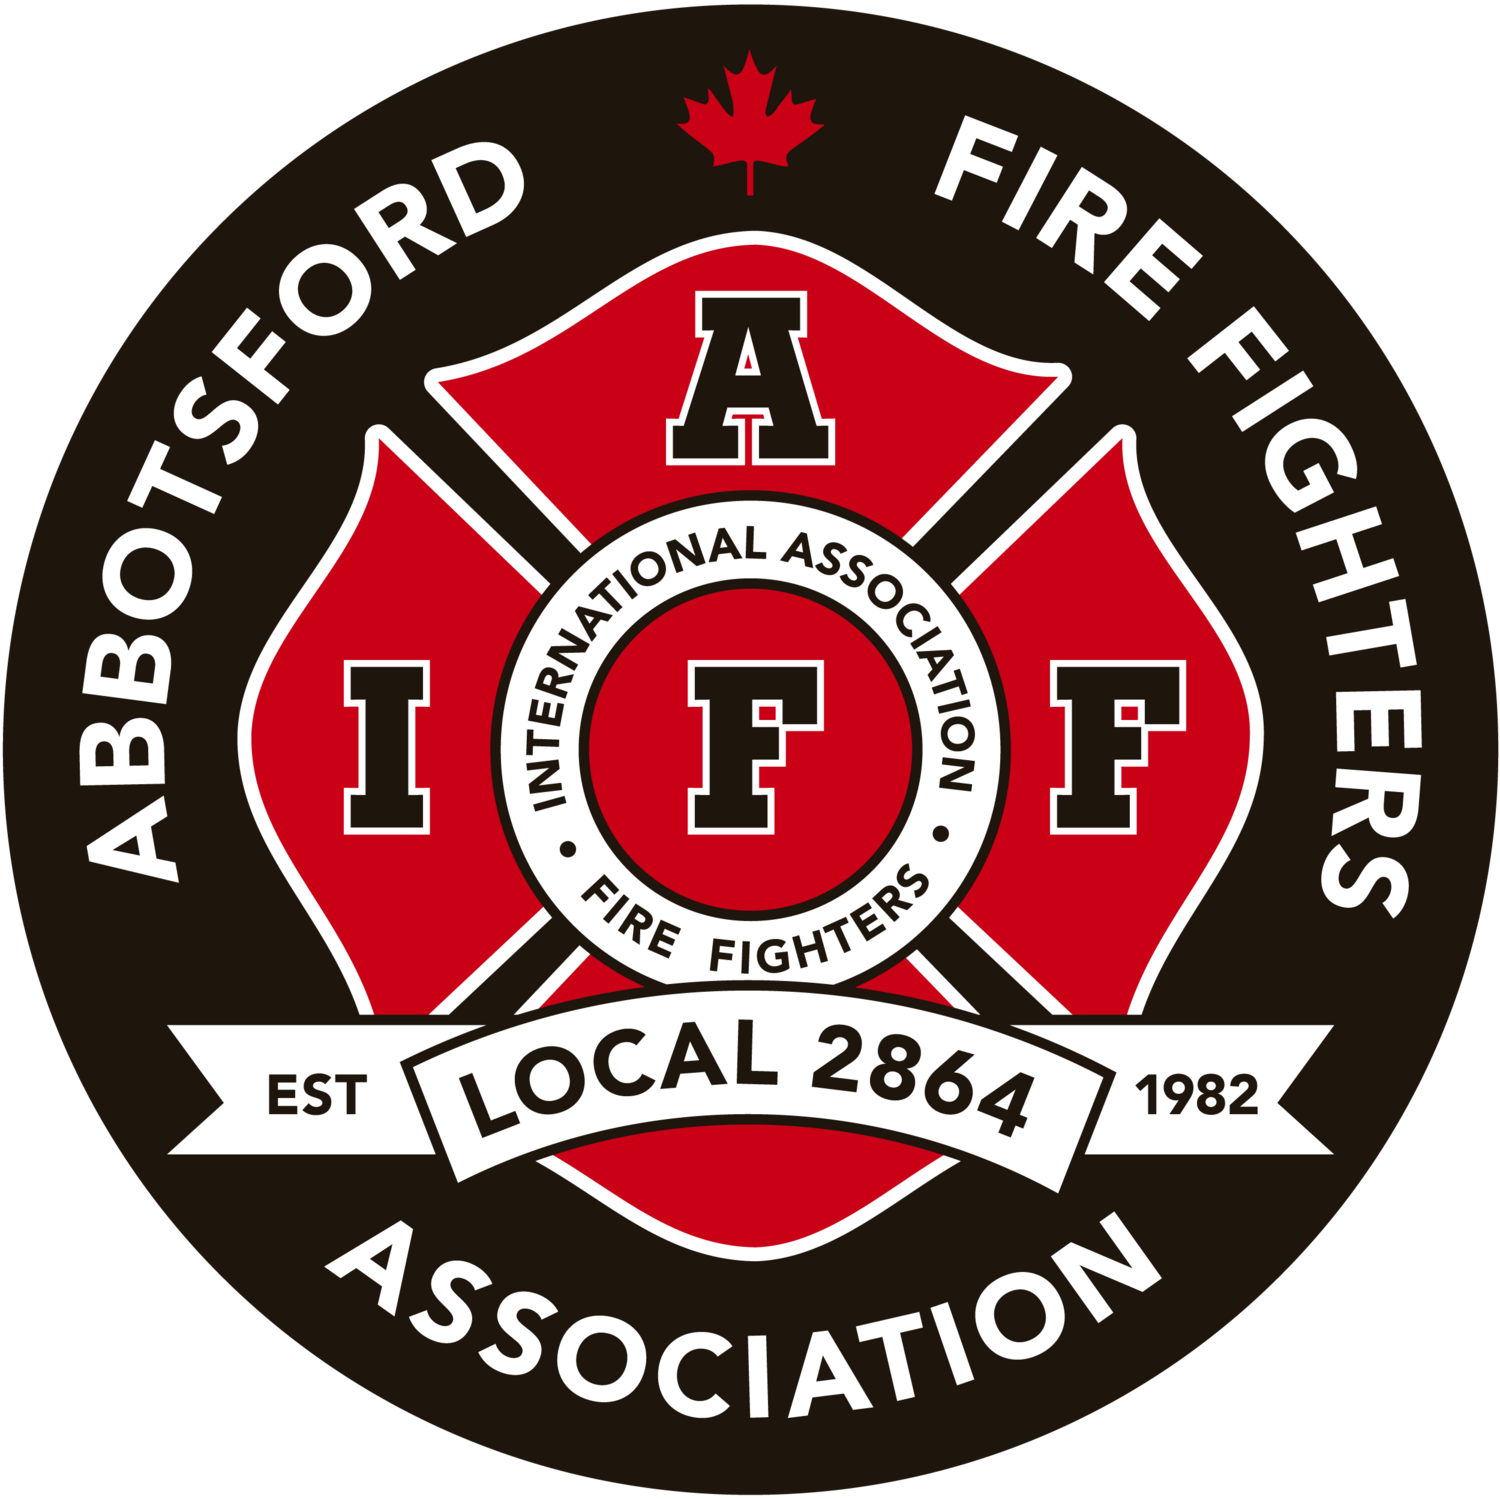 Abbotsford Fire Fighters Association 2864 | Abbotsford Fire Fighters Charitable Society | Abbotsford BC